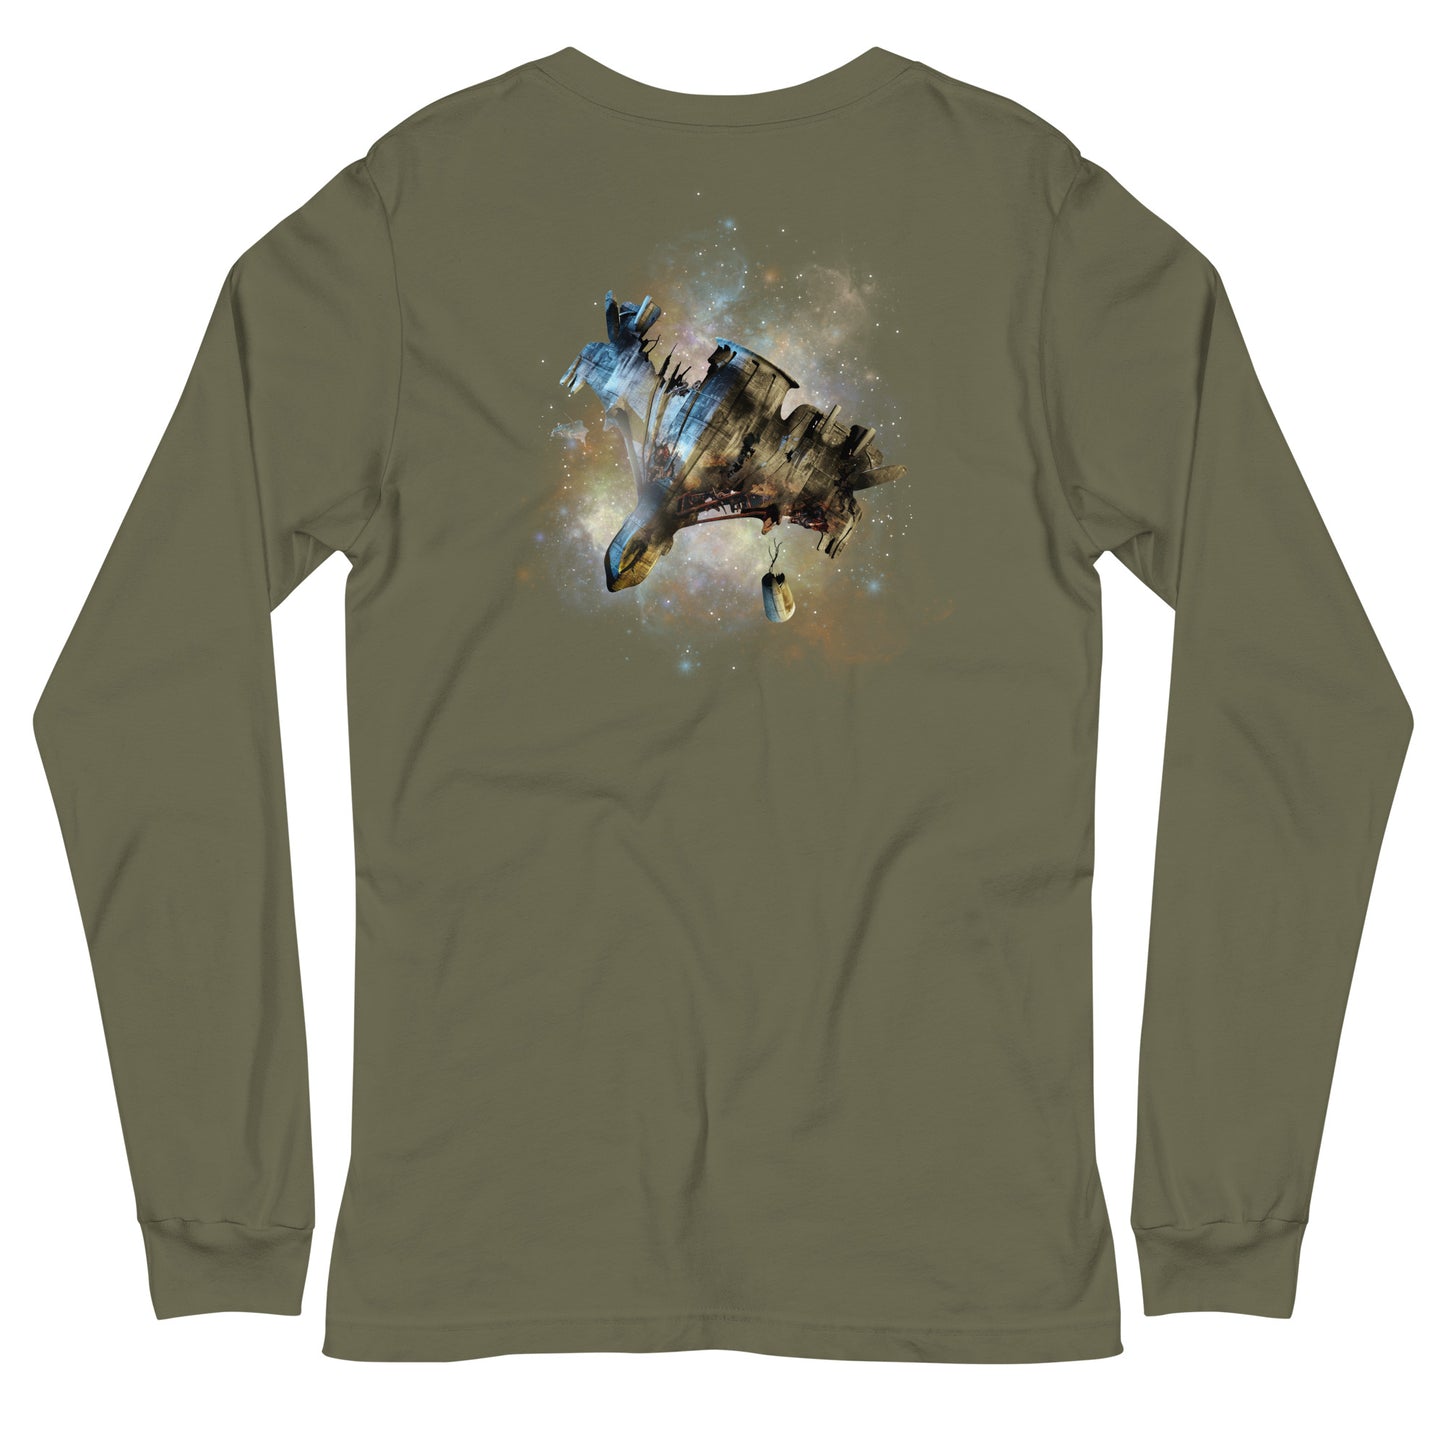 DIVING CREW & SPACESHIP WRECK L/S Tee - The Diving Universe by Kristine Kathryn Rusch